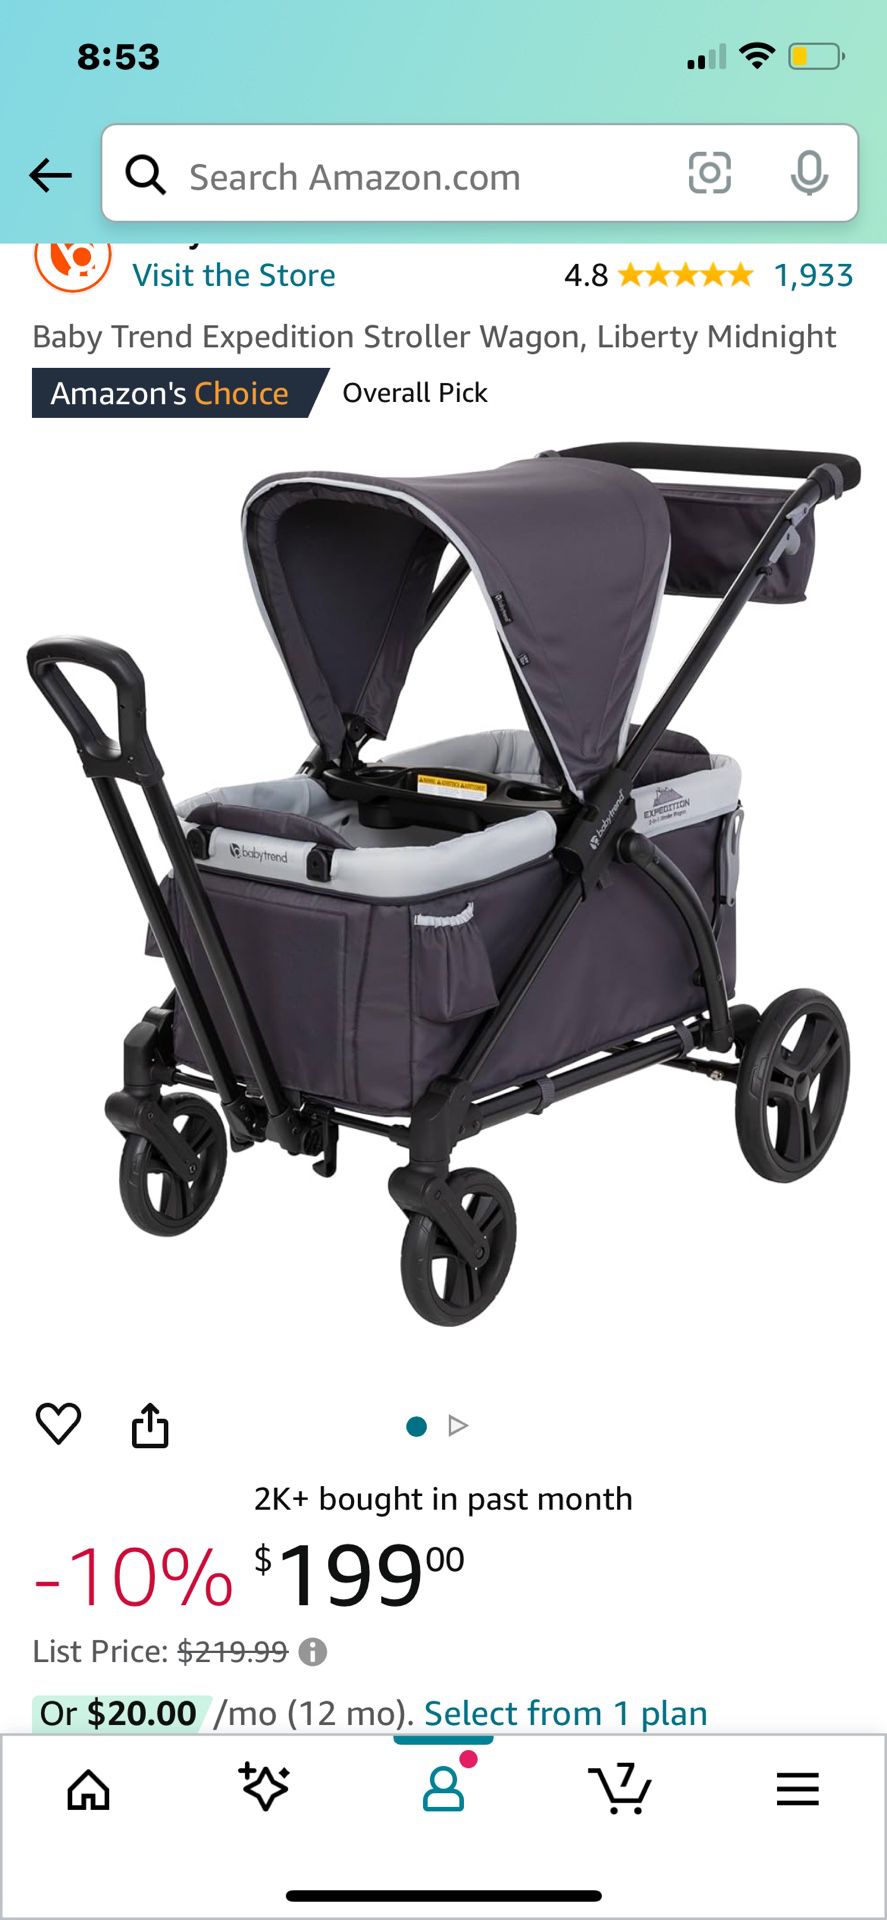 Brand new Unopened Baby Trend Expedition Stroller Wagon